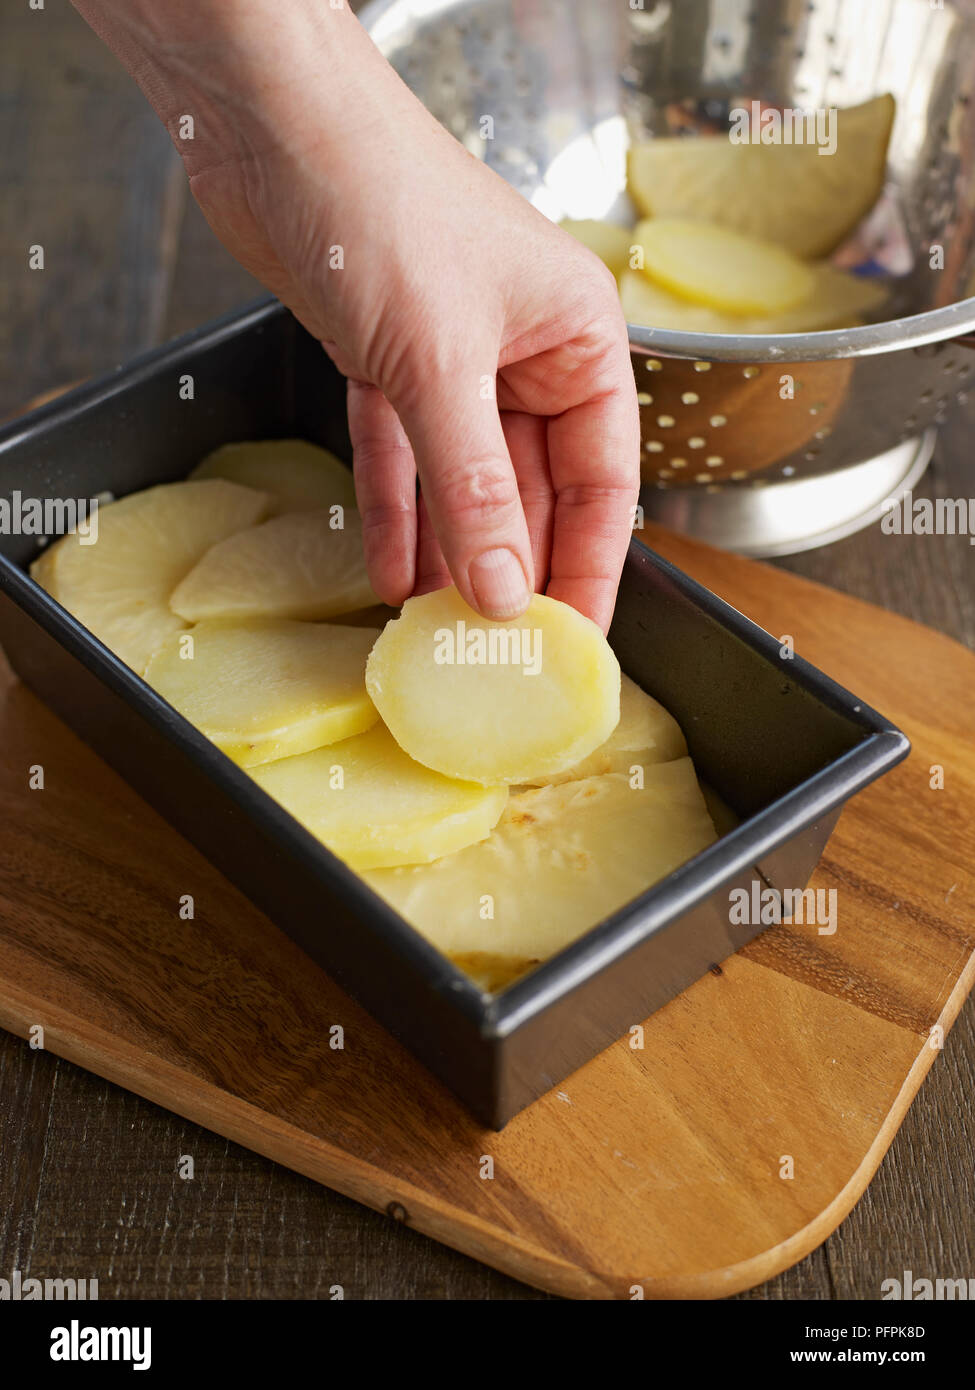 Layering potato and celeriac slices in loaf tin (making potato and celeriac gratin) Stock Photo